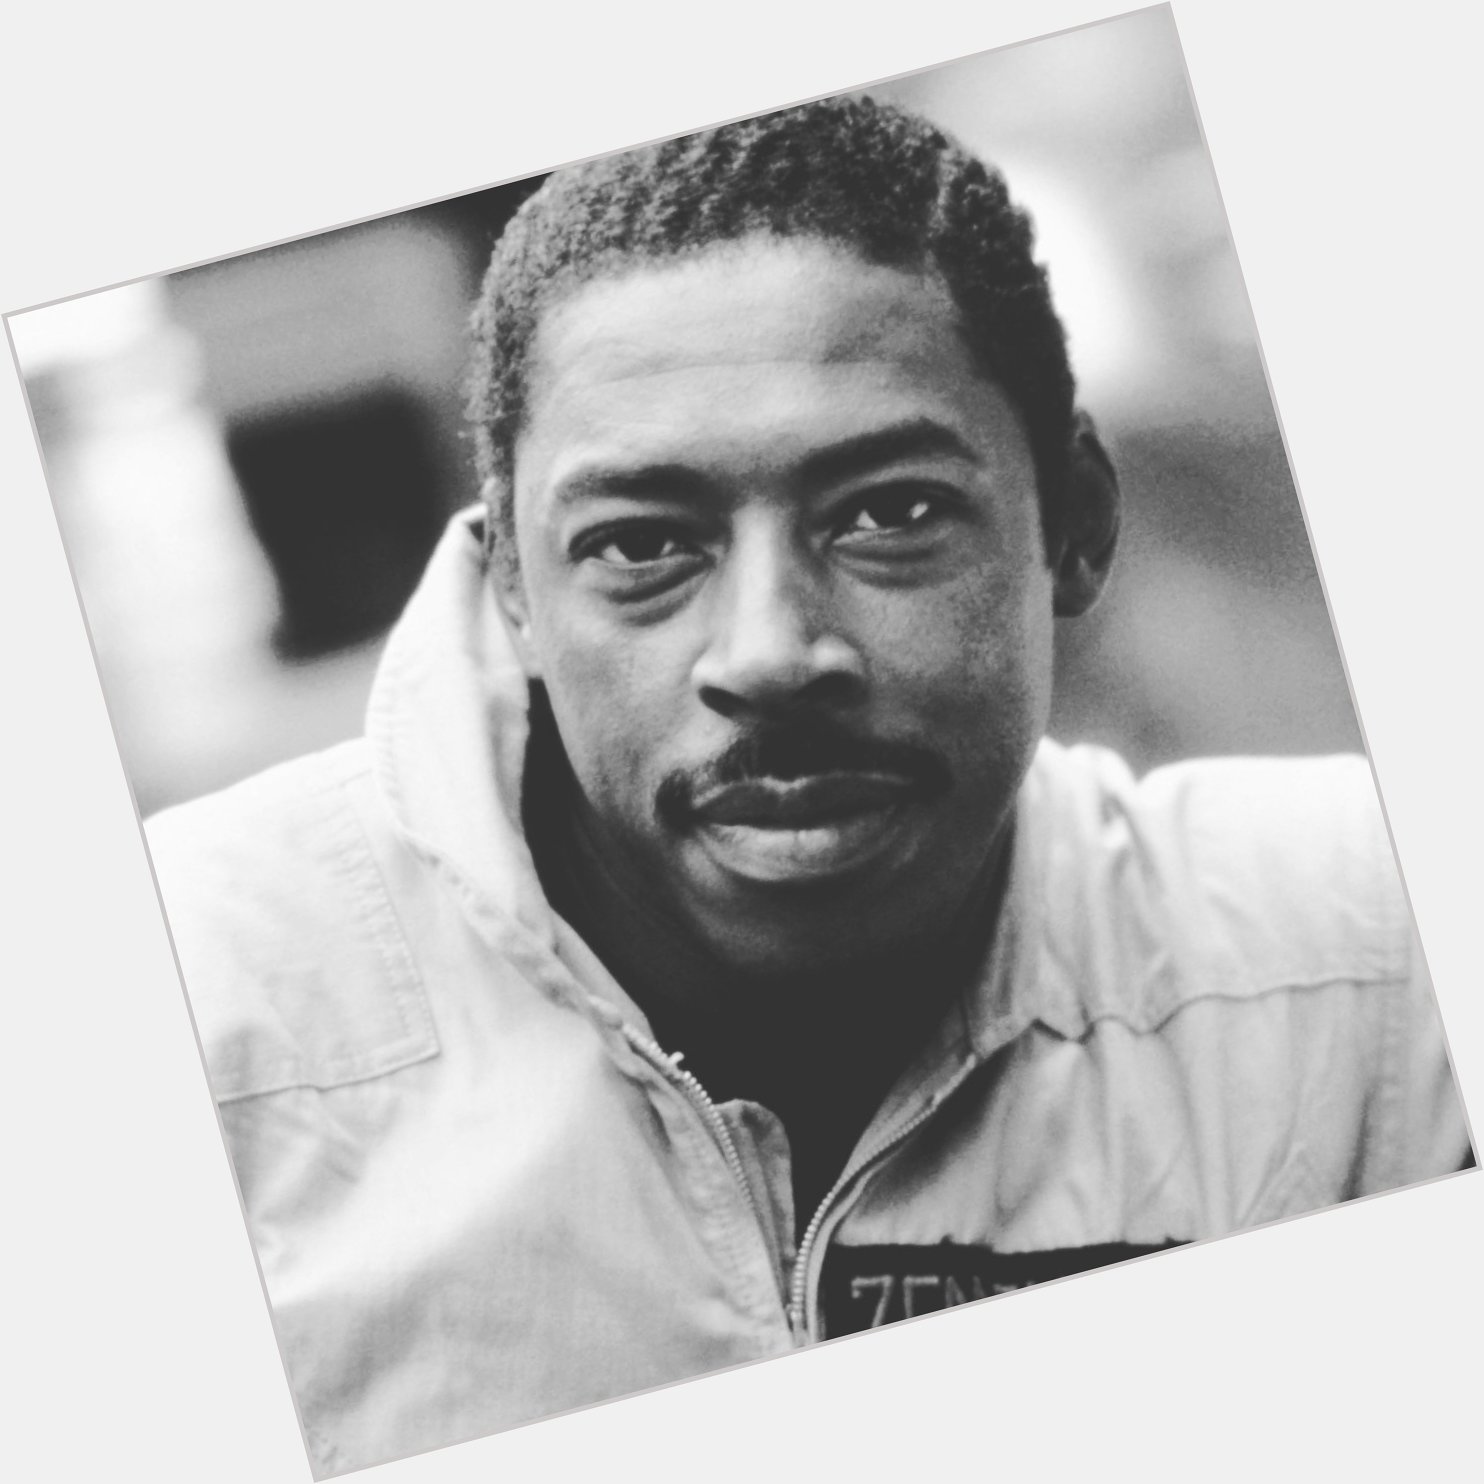 Happy Birthday to the one and only Ernie Hudson!  